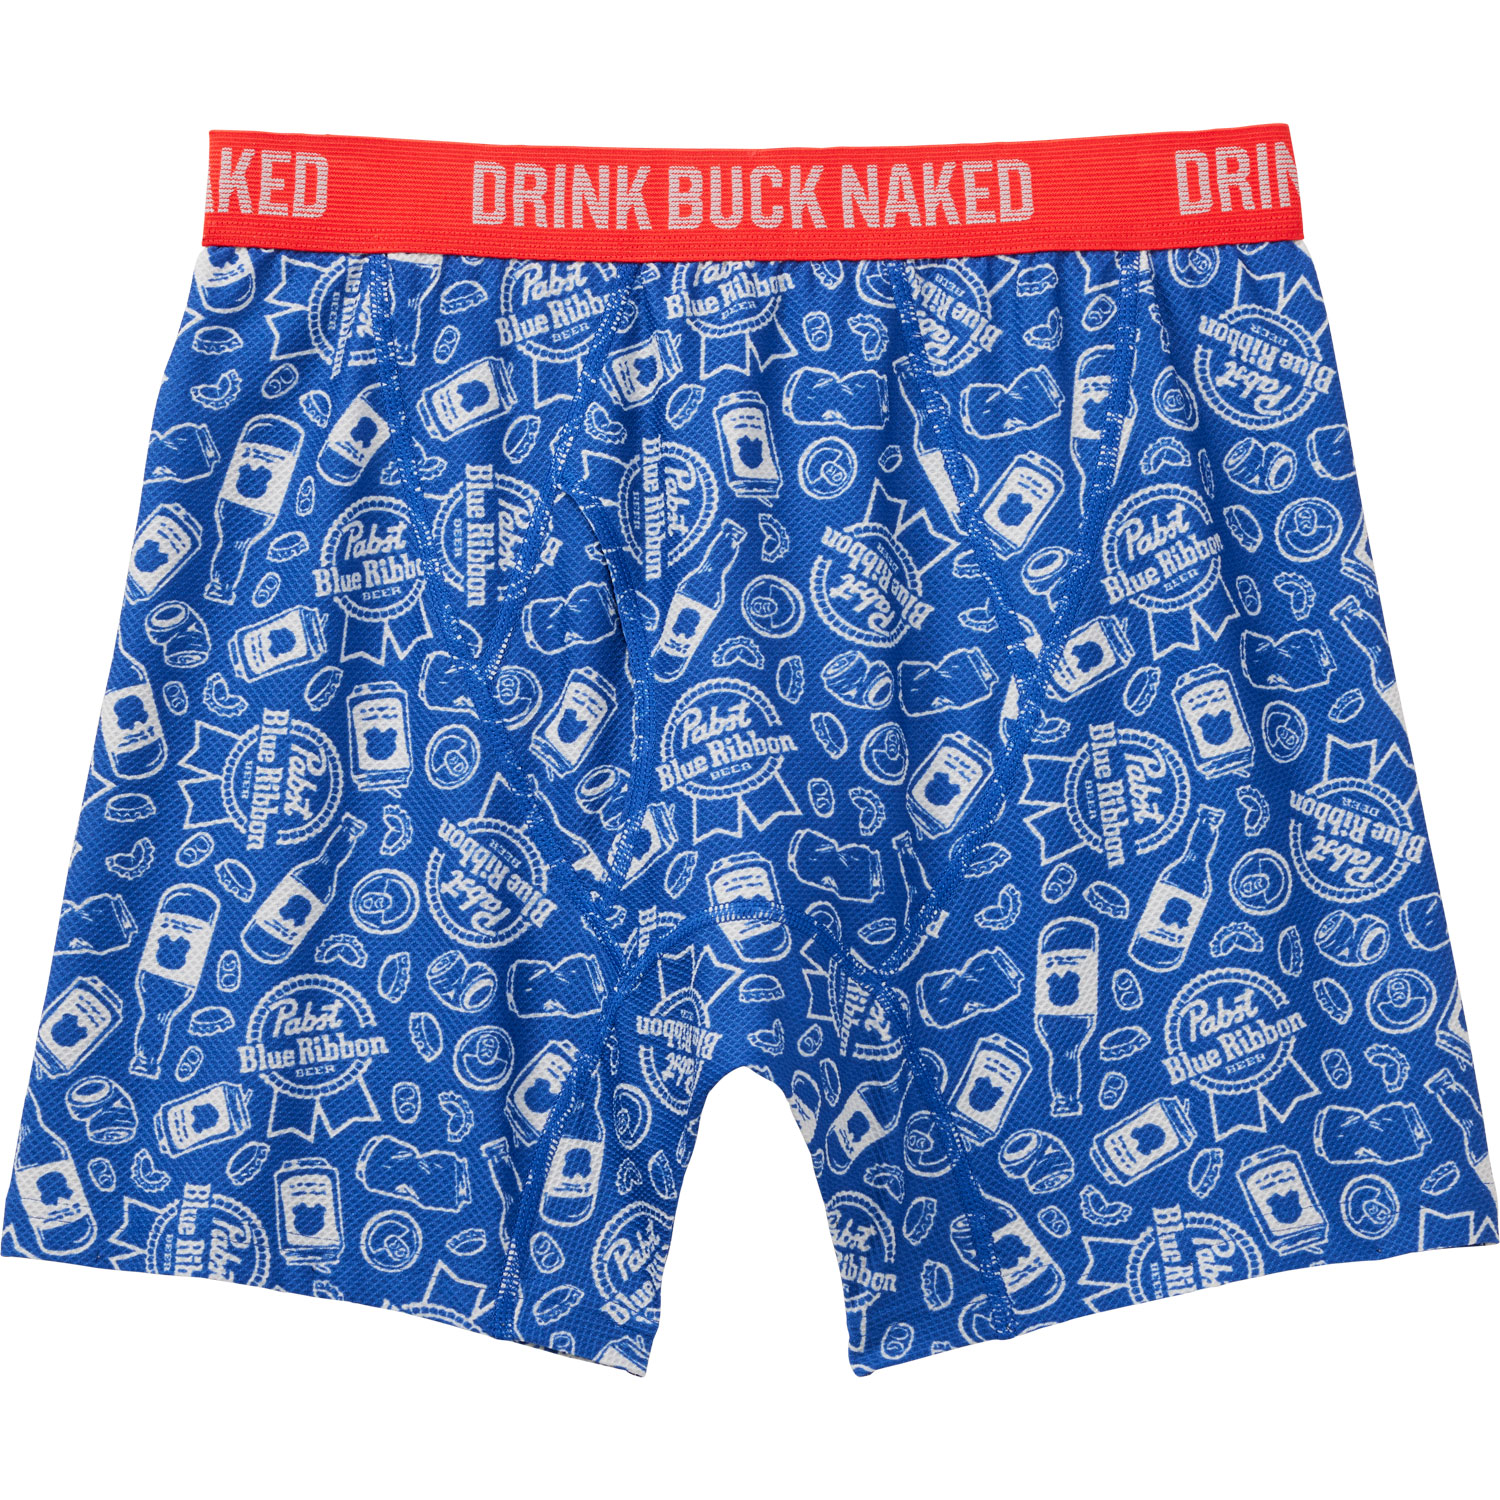 Duluth Trading Co 1 Pair X Long Buck Naked Boxer Brief Red 76713